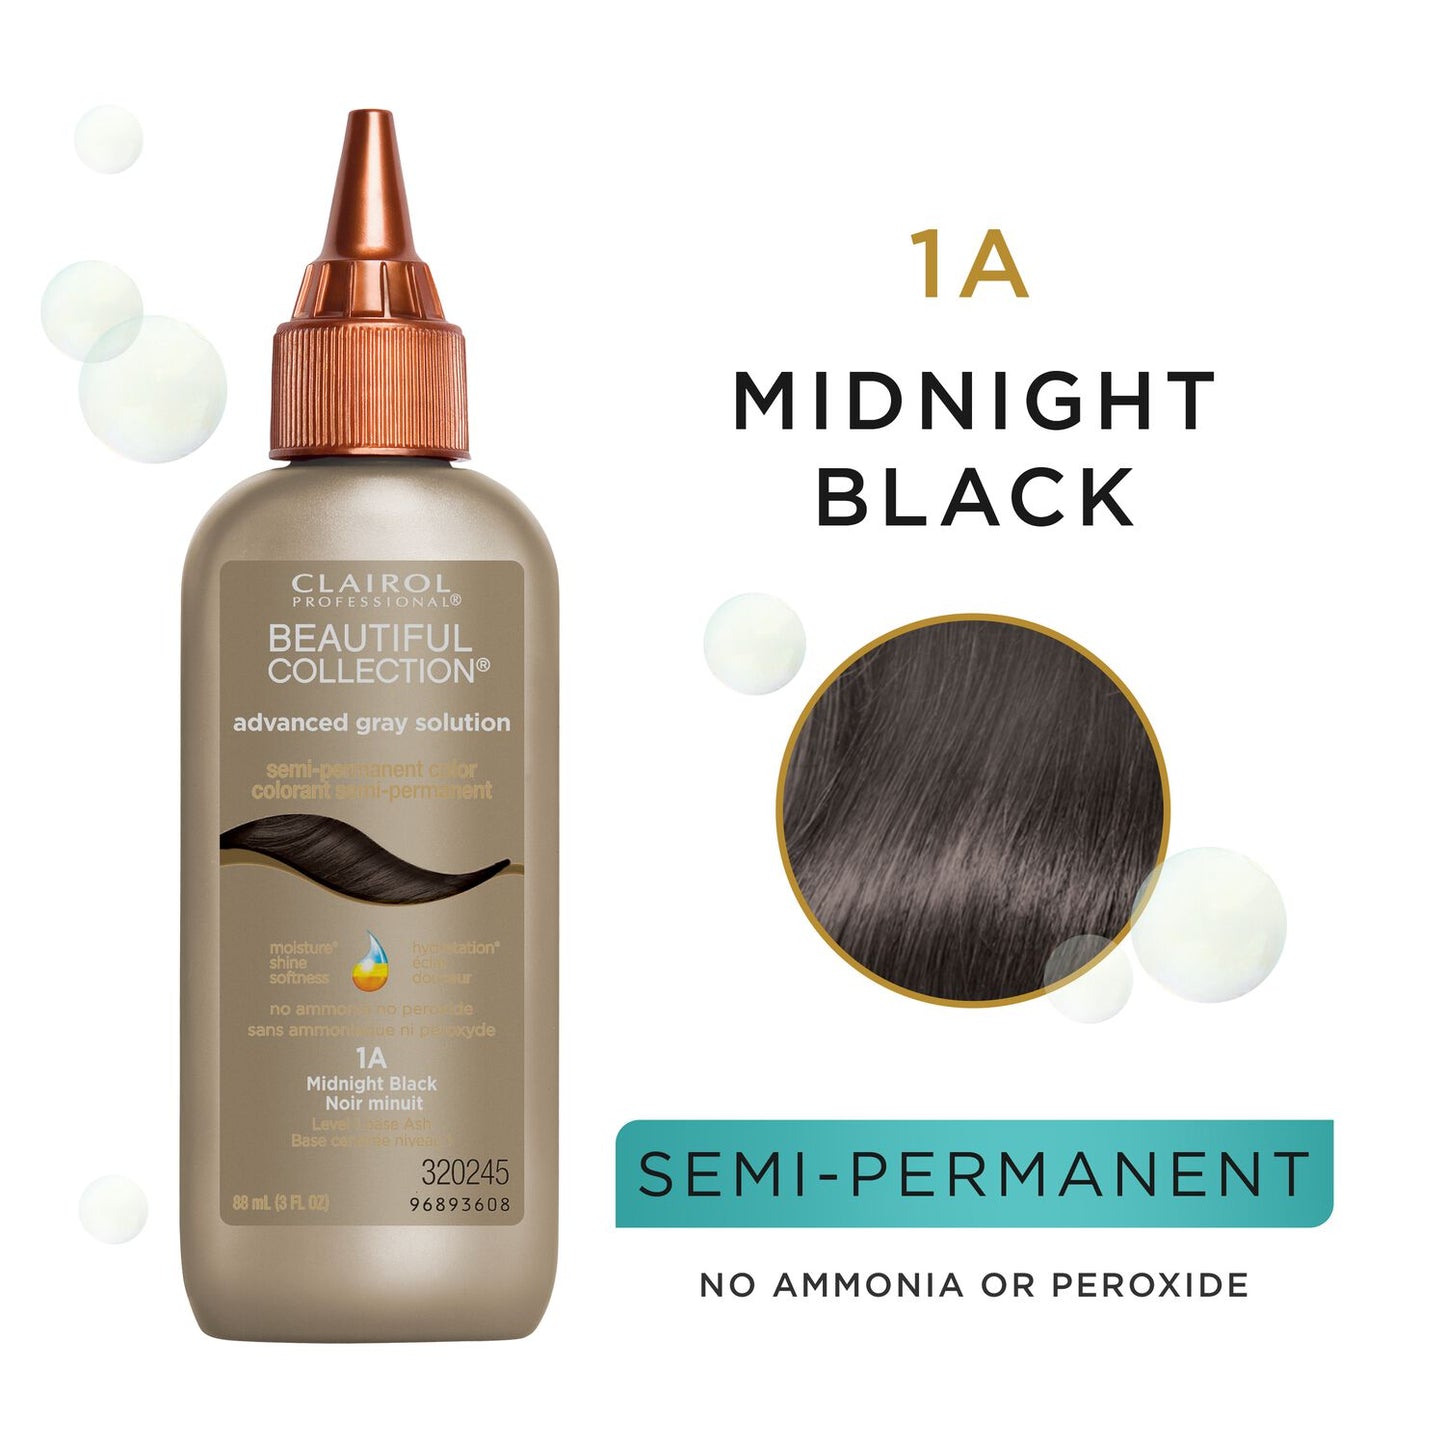 Beautiful Collection  by   Clairol Professional Clairol Beautiful Collection Advanced Gray Solution Semi-permanent Color Midnight Black